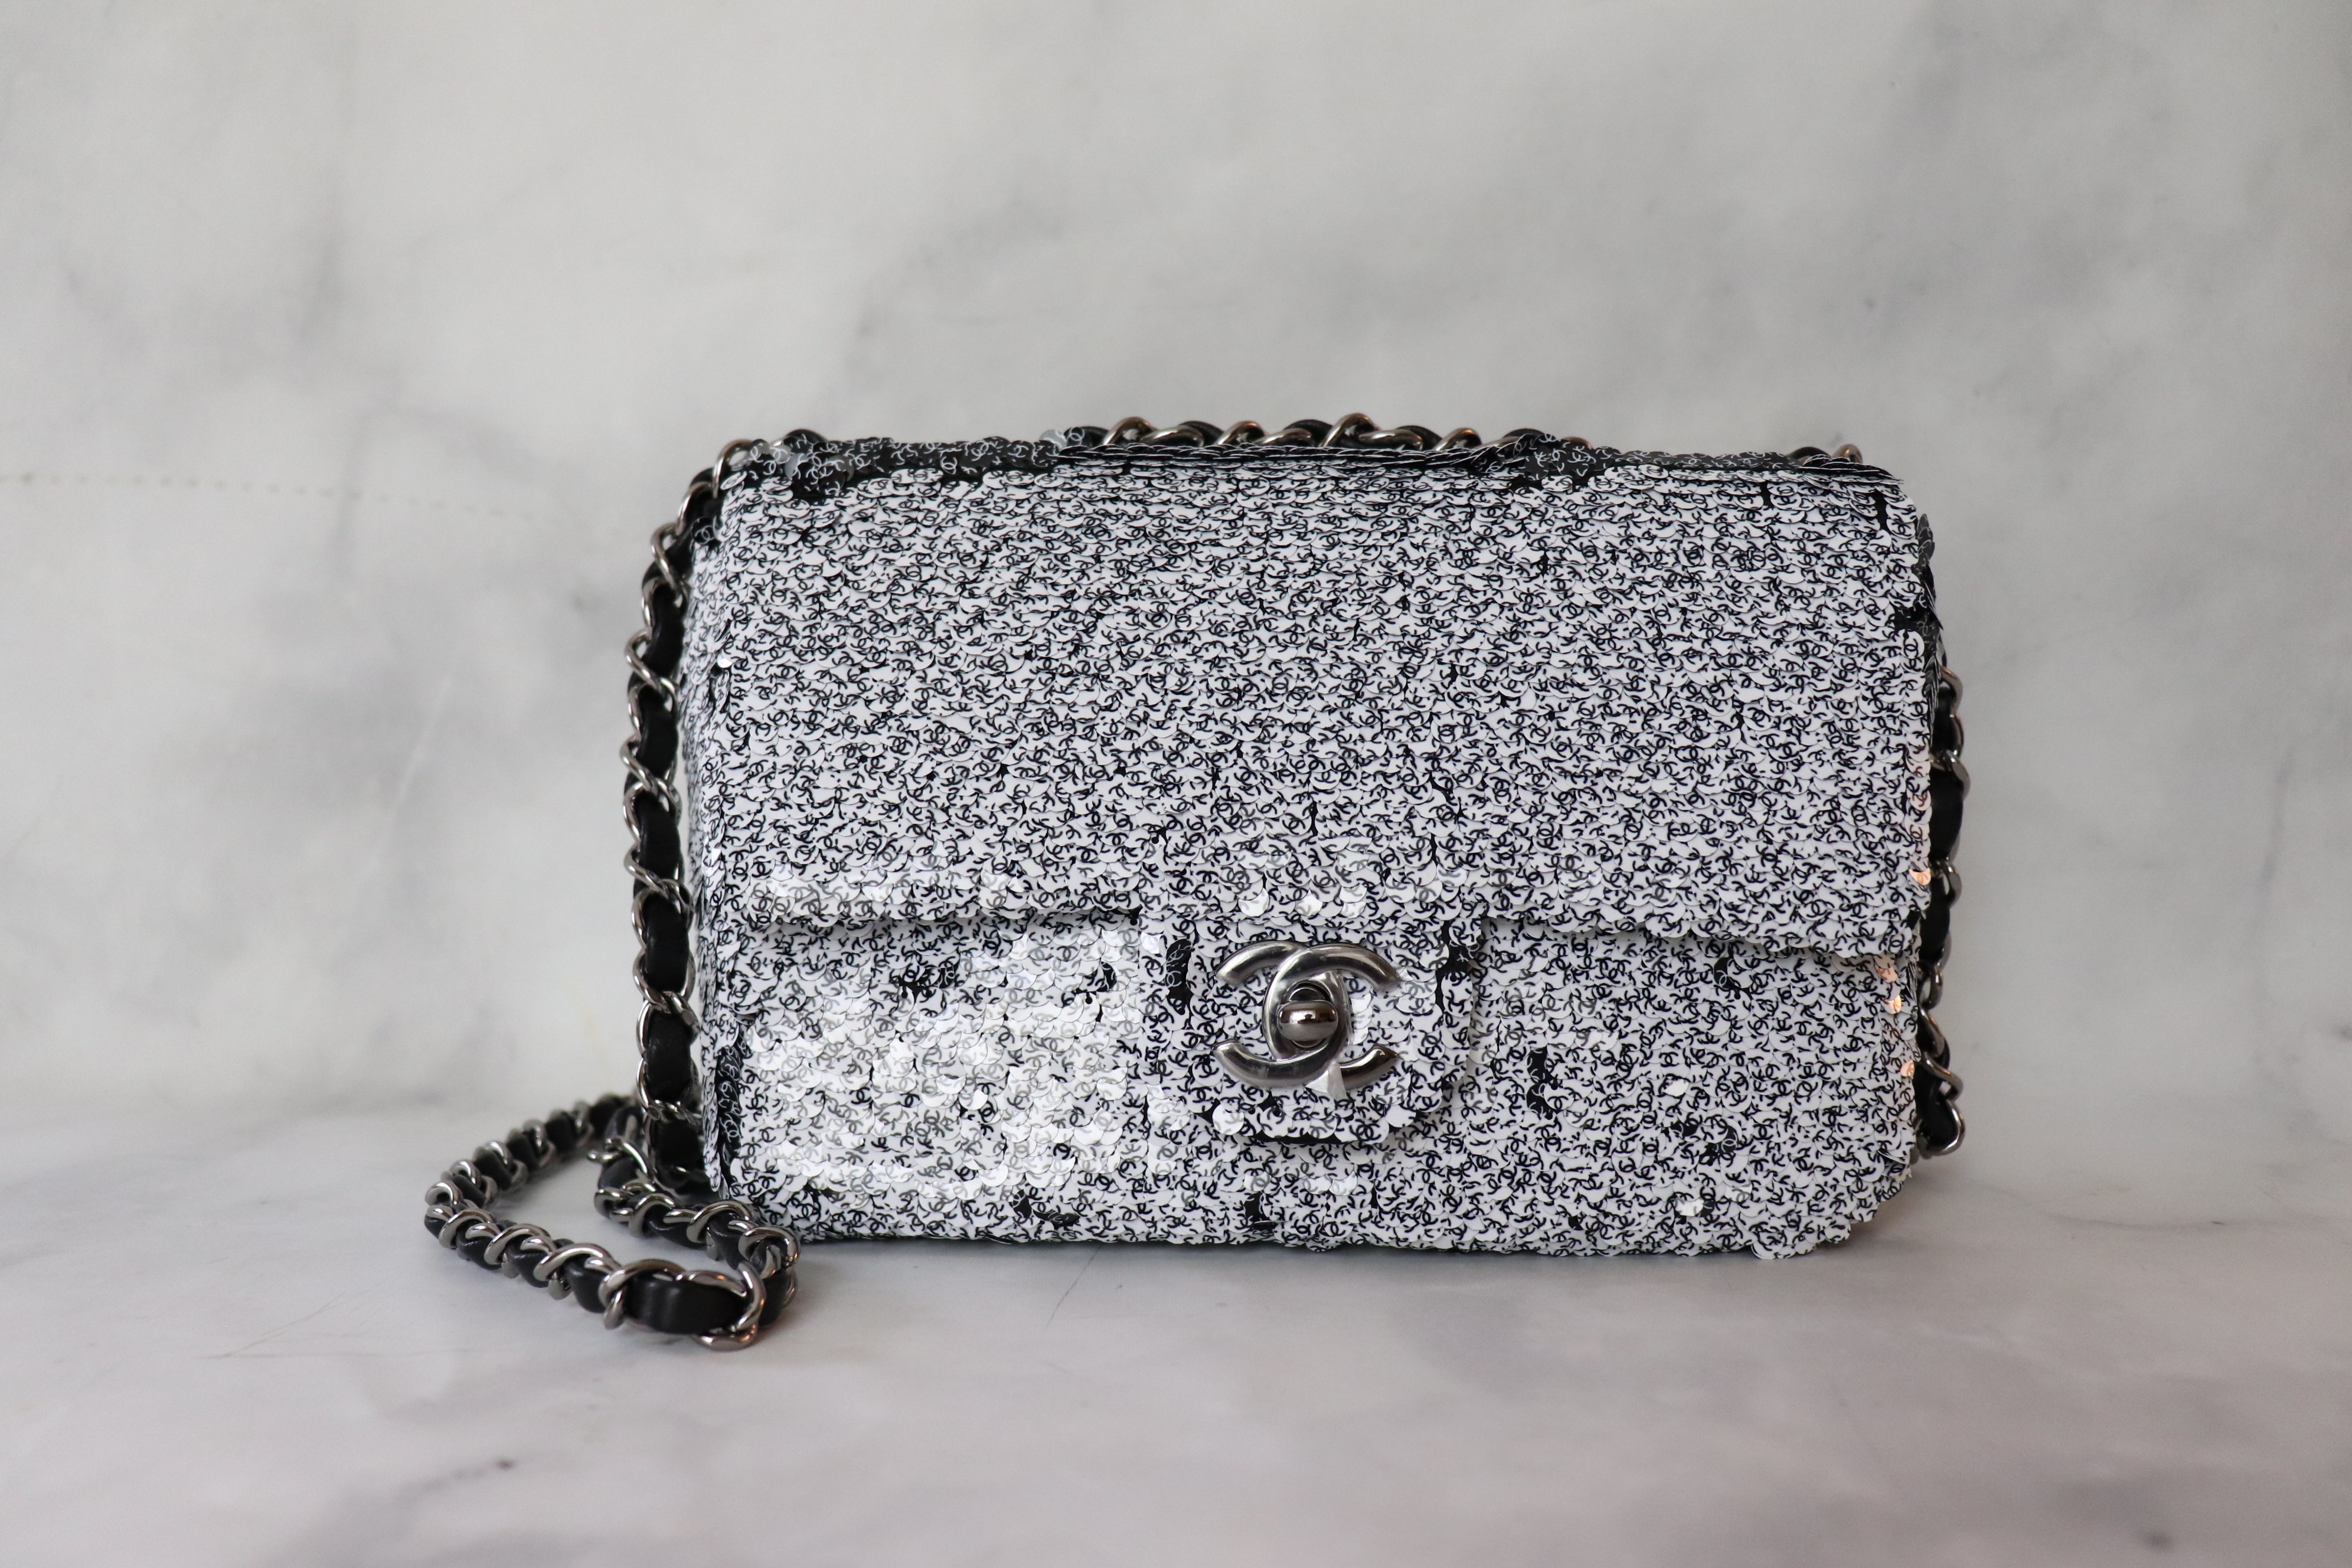 Chanel Sequin Mini Flap Black and White, New in Dustbag